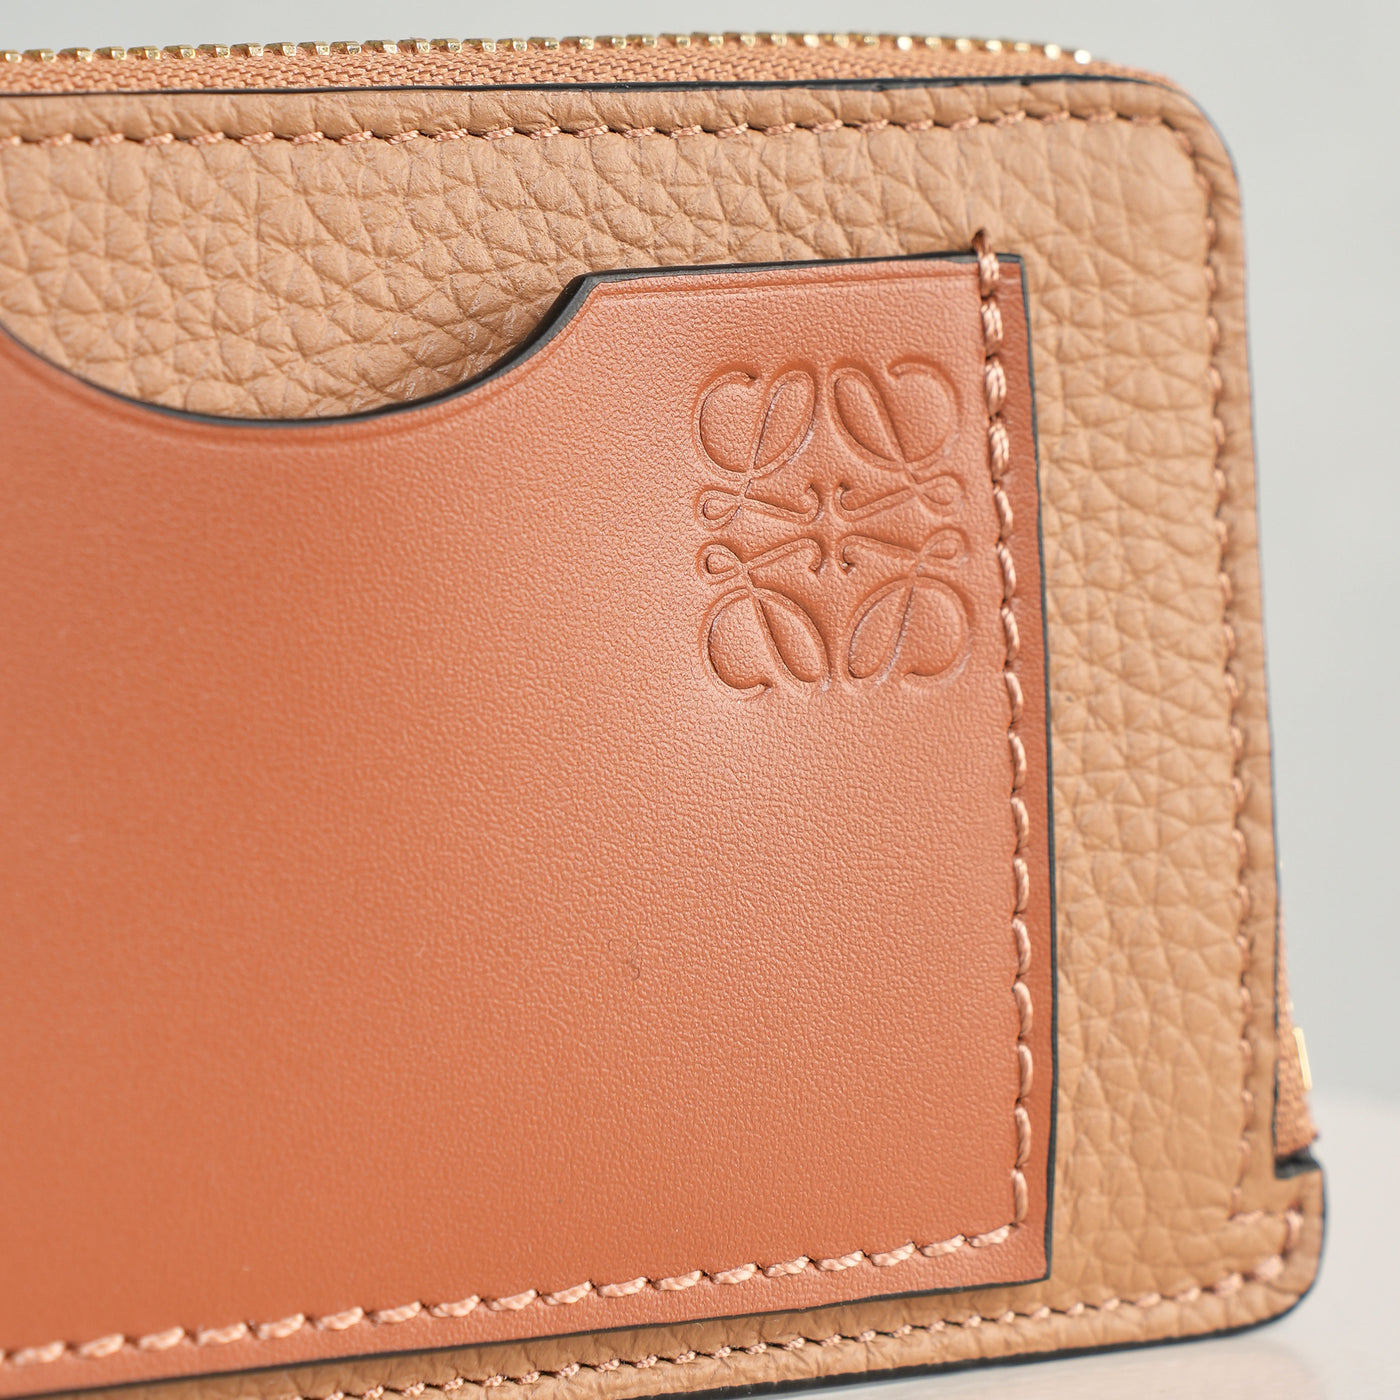 LOEWE brown anagram coin leather cardholder with zipper